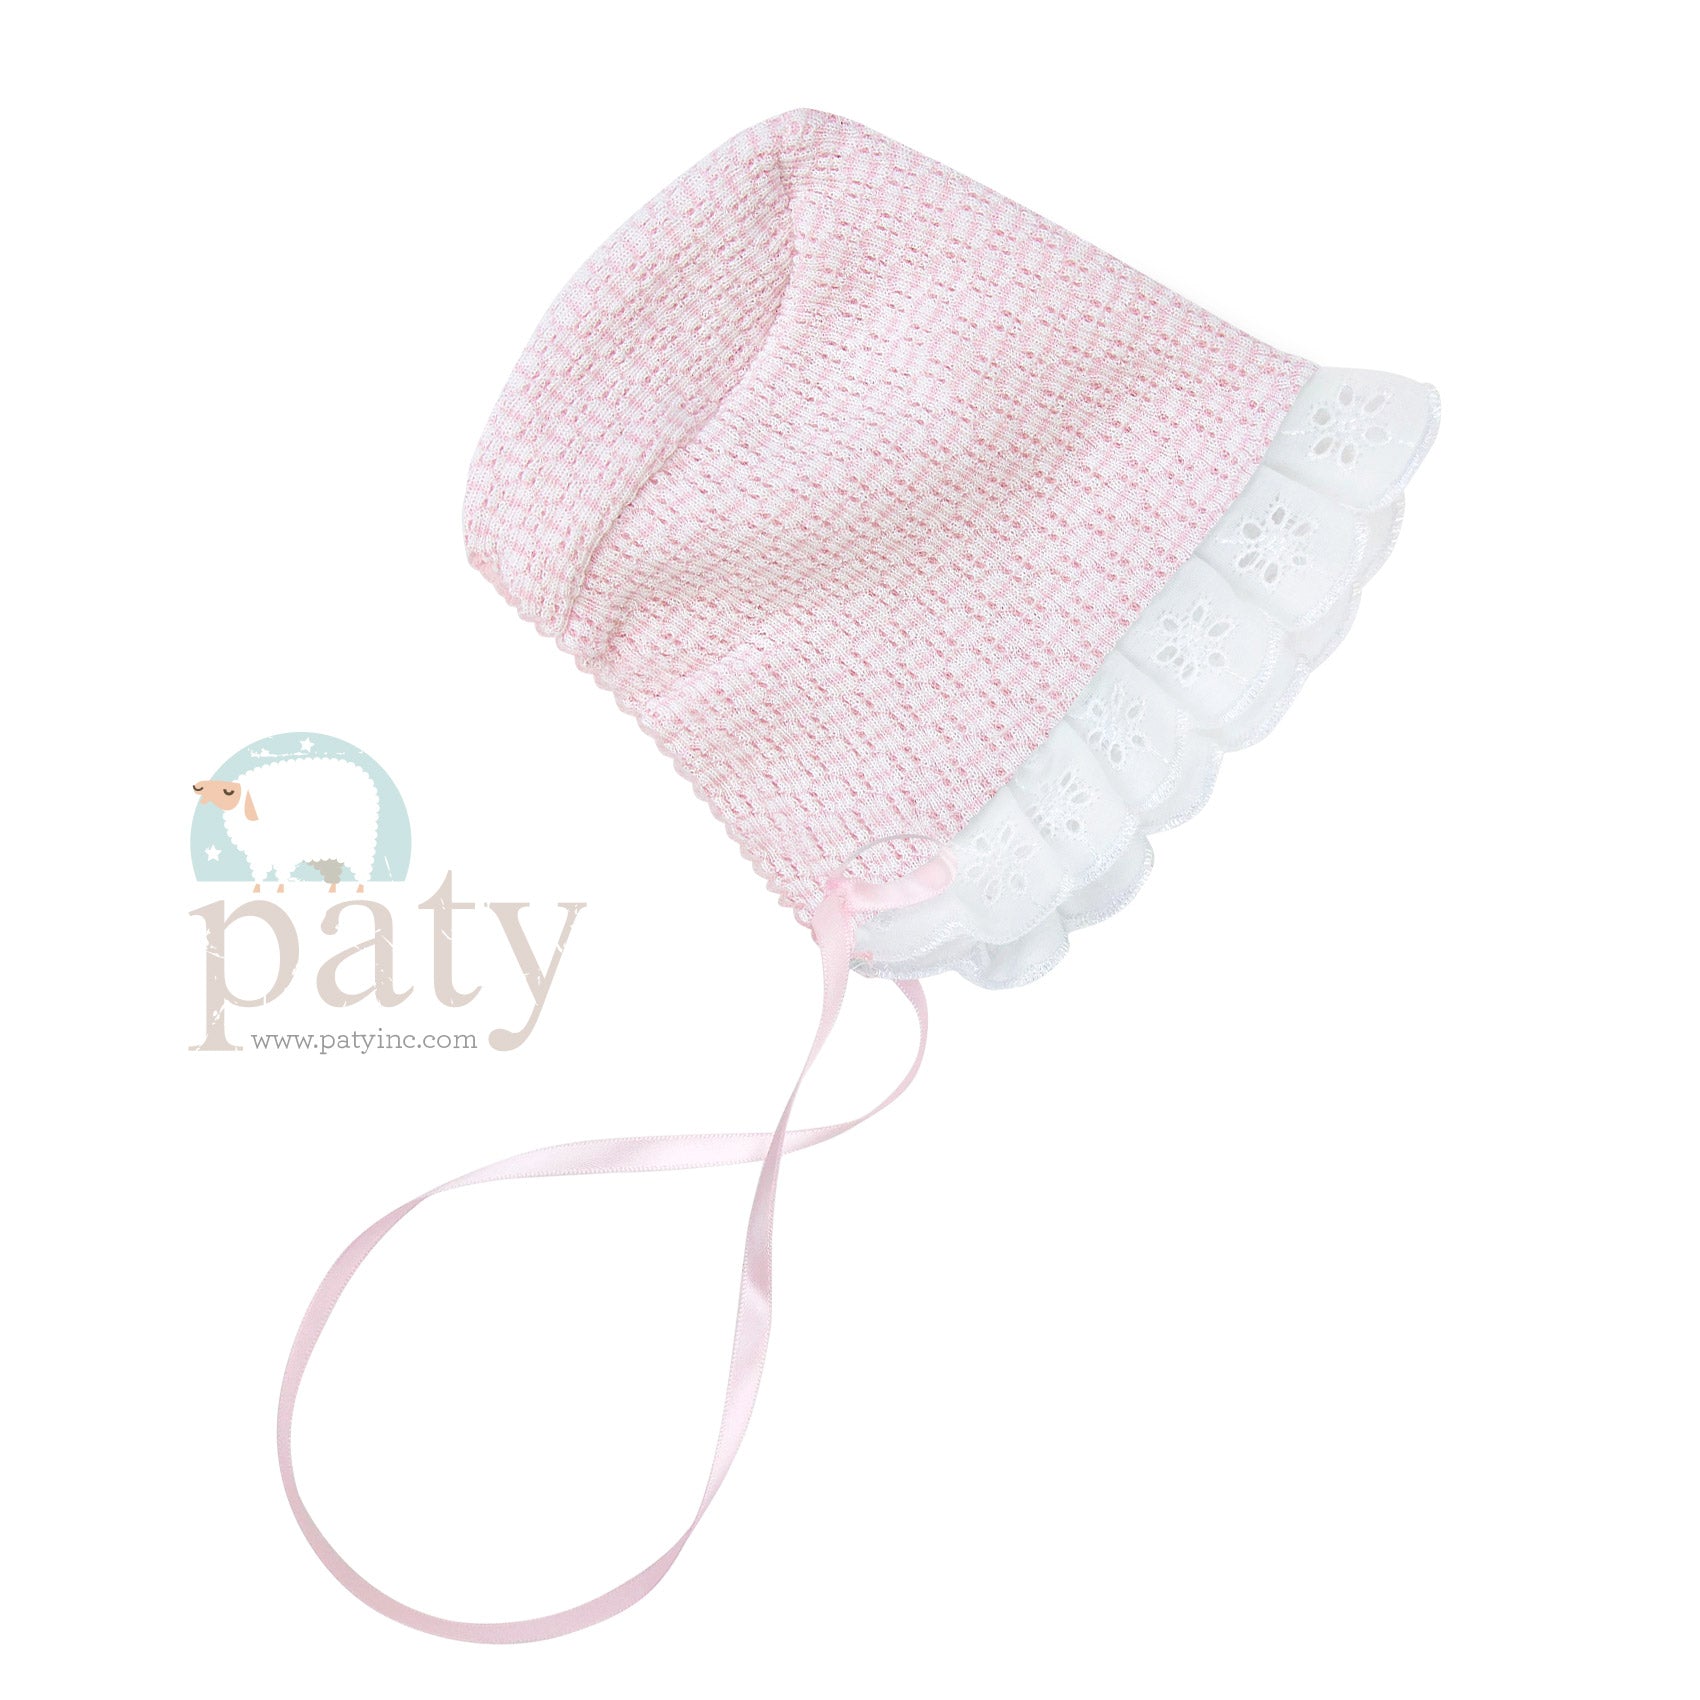 Paty Knit Solid Color Bonnet with Eyelet & Ribbon Tie